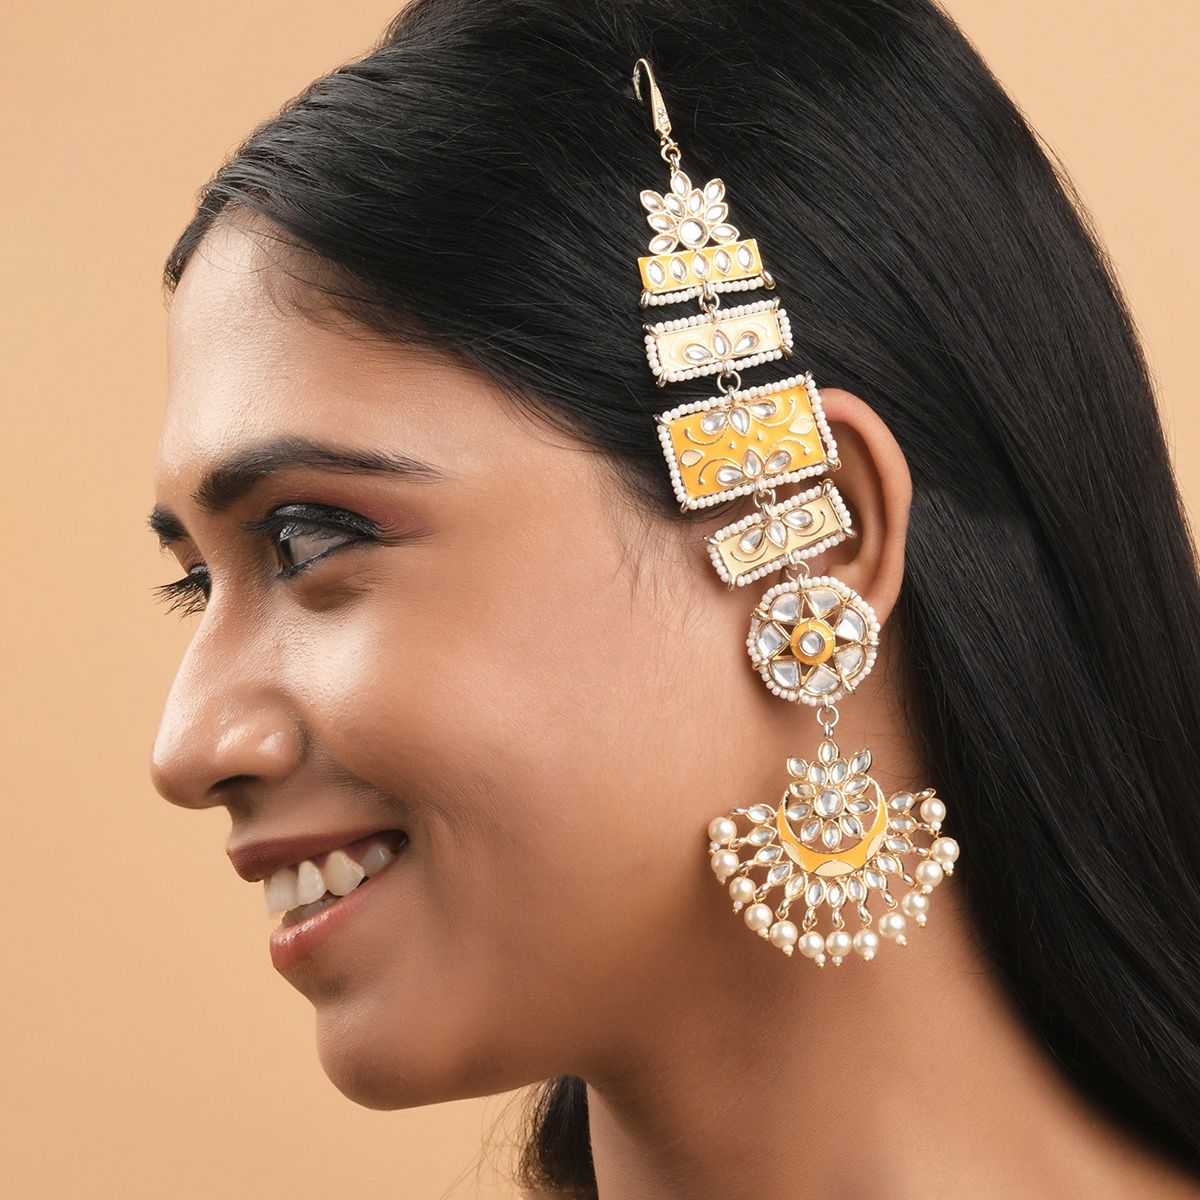 Buy GoldNera Designer Gold Plated Kaan chain Jhumki Earrings Online  399  from ShopClues